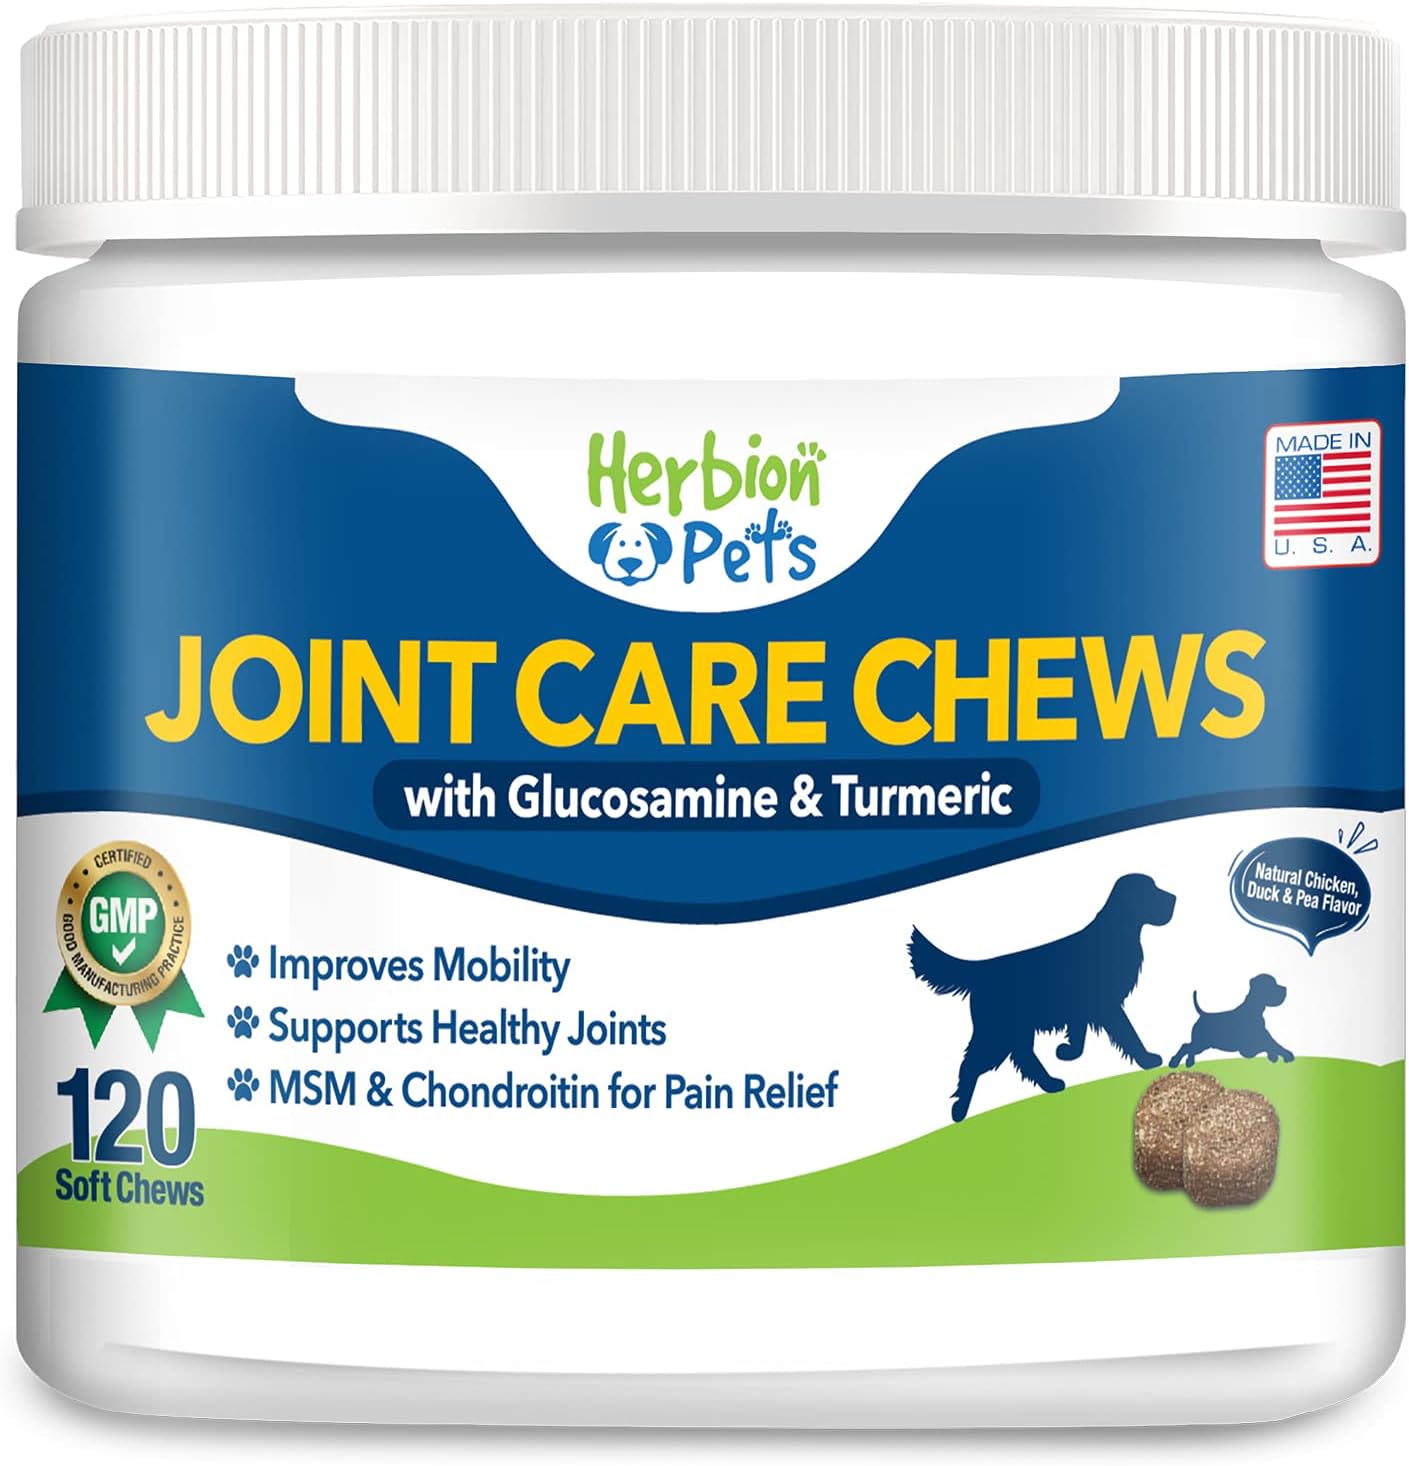 Herbion Pets Joint Care Chews with Glucosamine & Turmeric, 120 Soft Chews - MSM & Chondroitin for Pain Relief - Improves Mobility - Supports Healthy Joints - Made in The USA - for Dogs 12 Weeks+